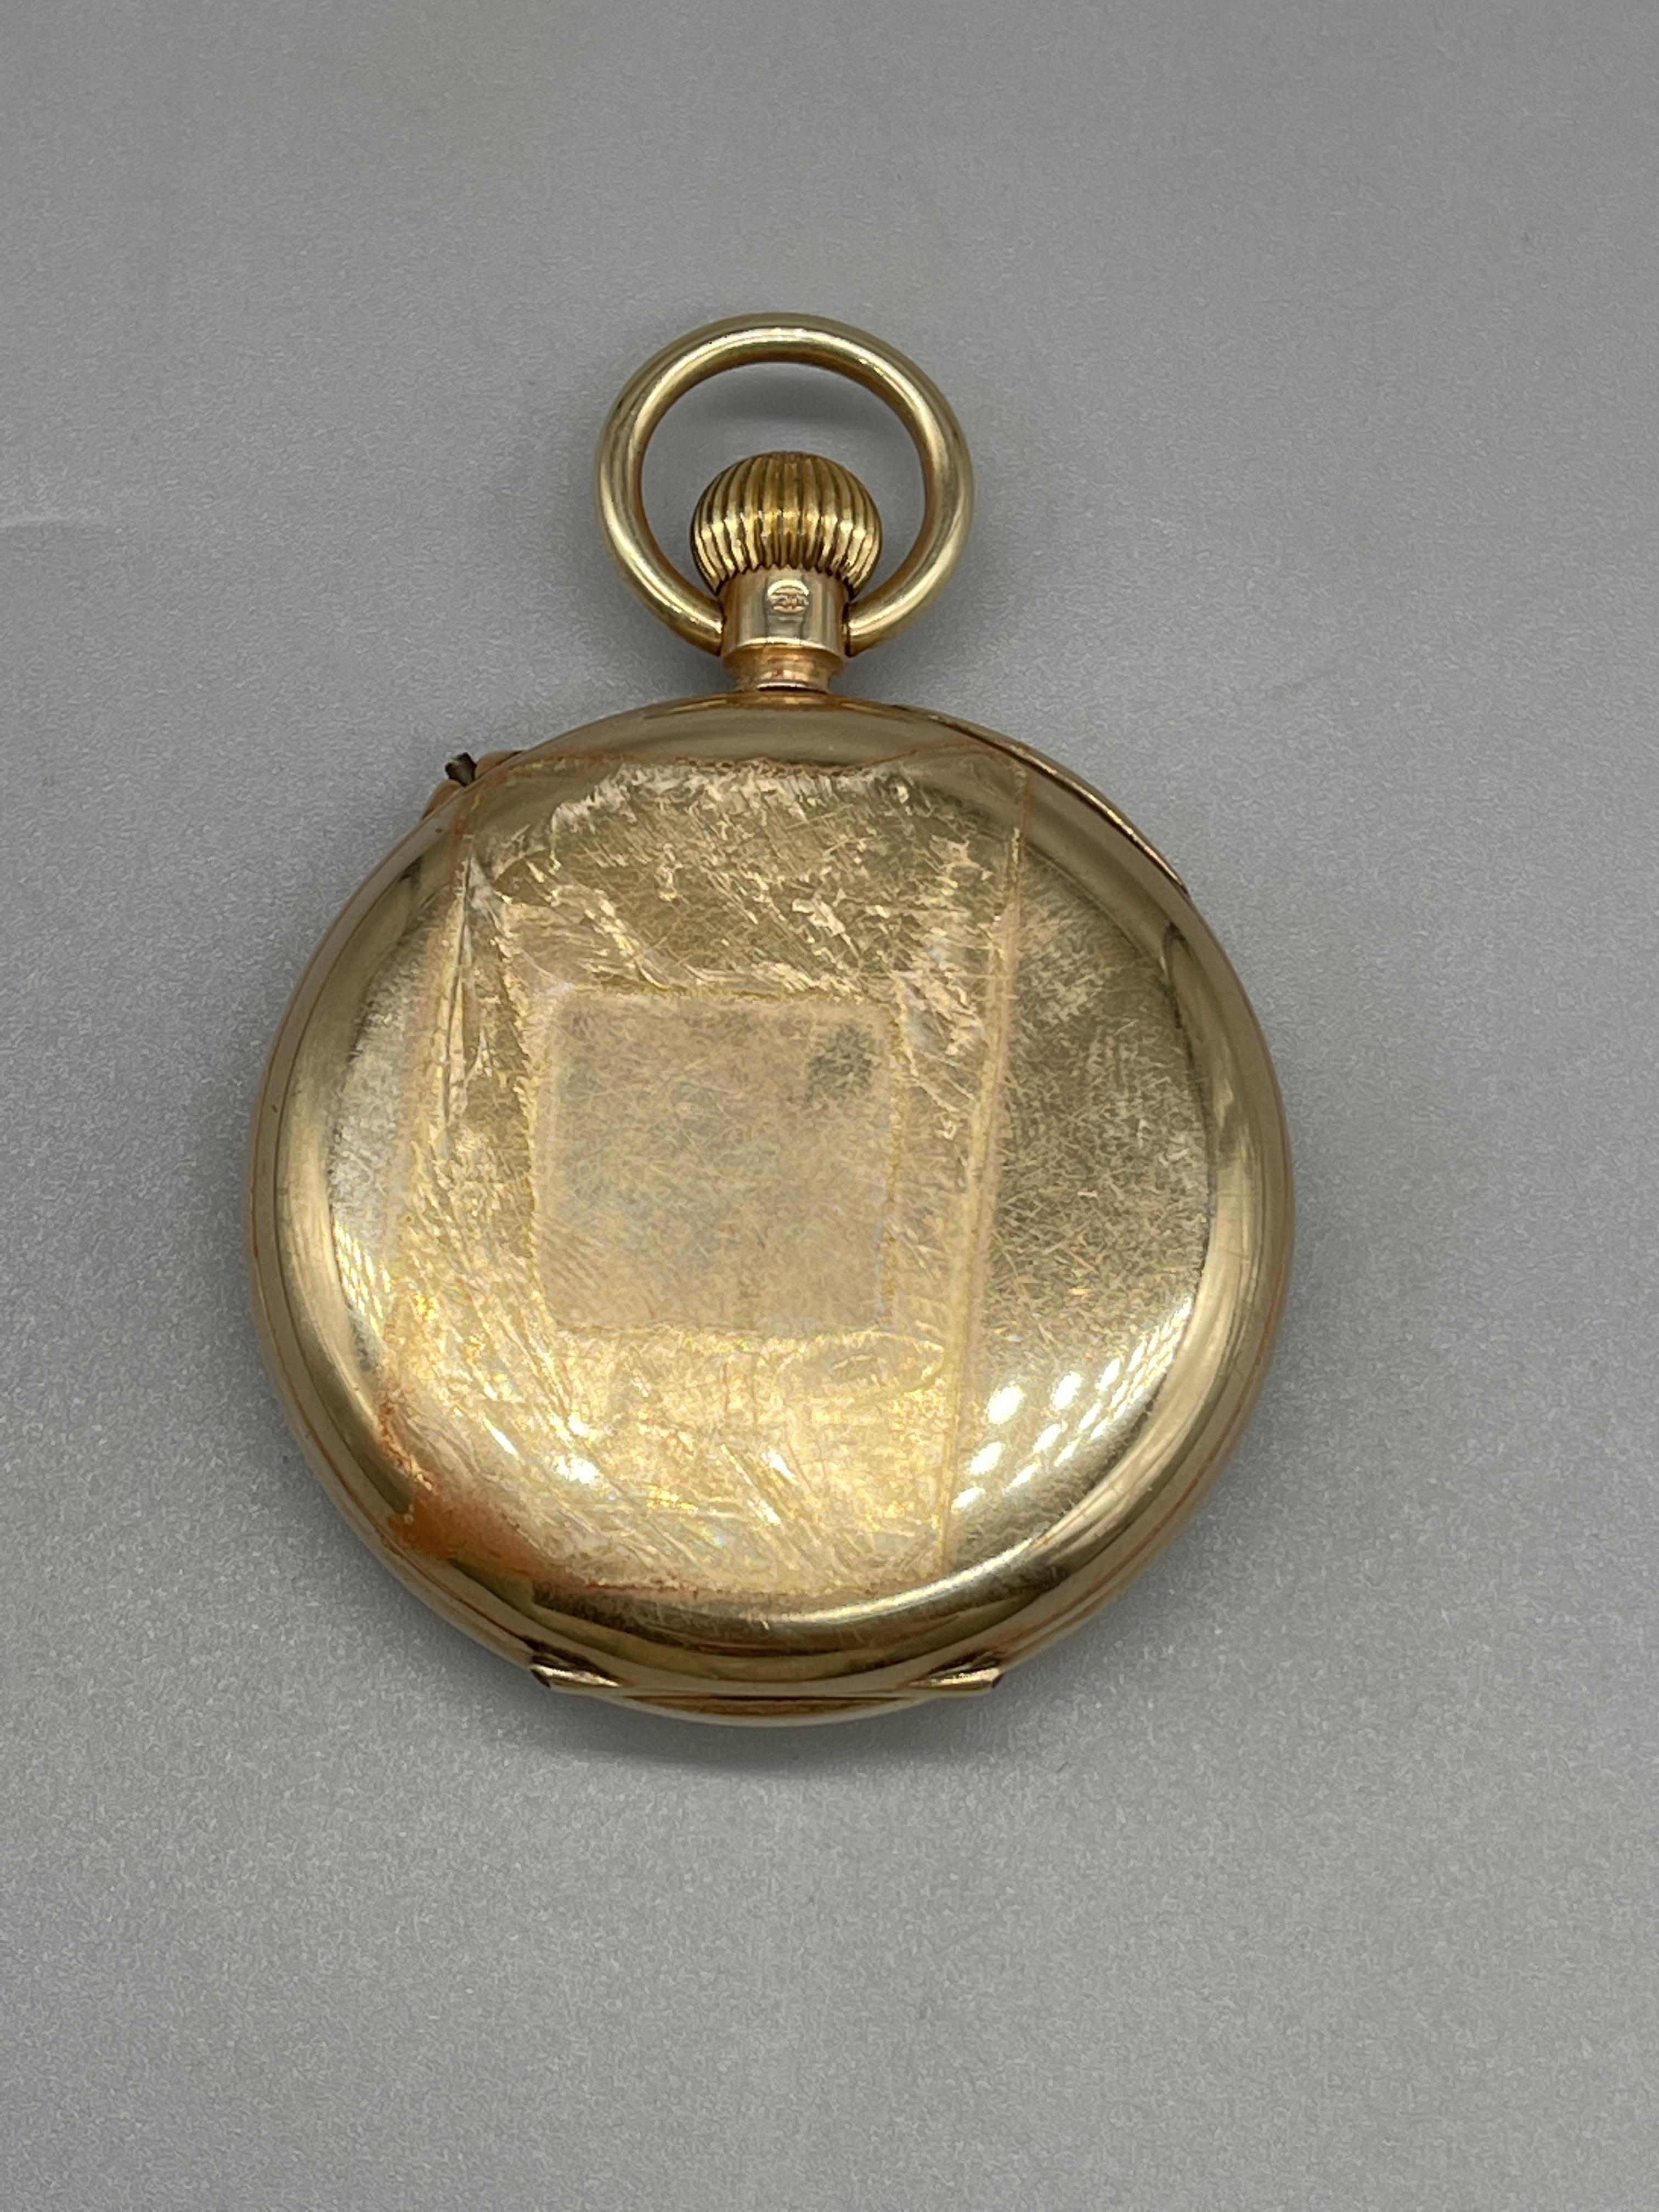 9 ct Gold pocket watch - Image 2 of 4